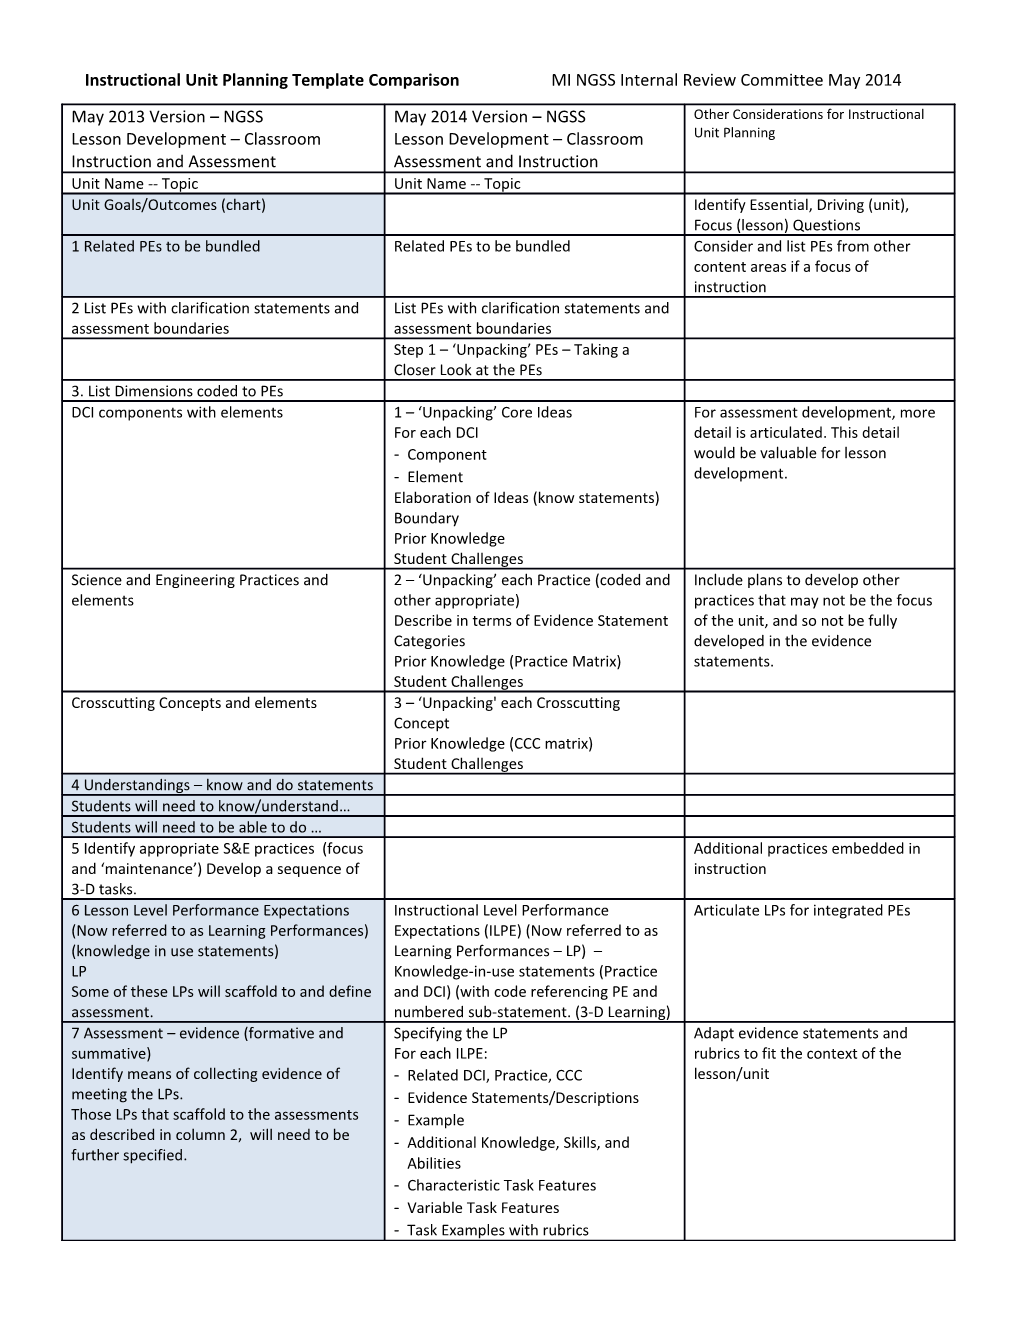 Instructional Unit Planning Template Comparison MI NGSS Internal Review Committee May 2014